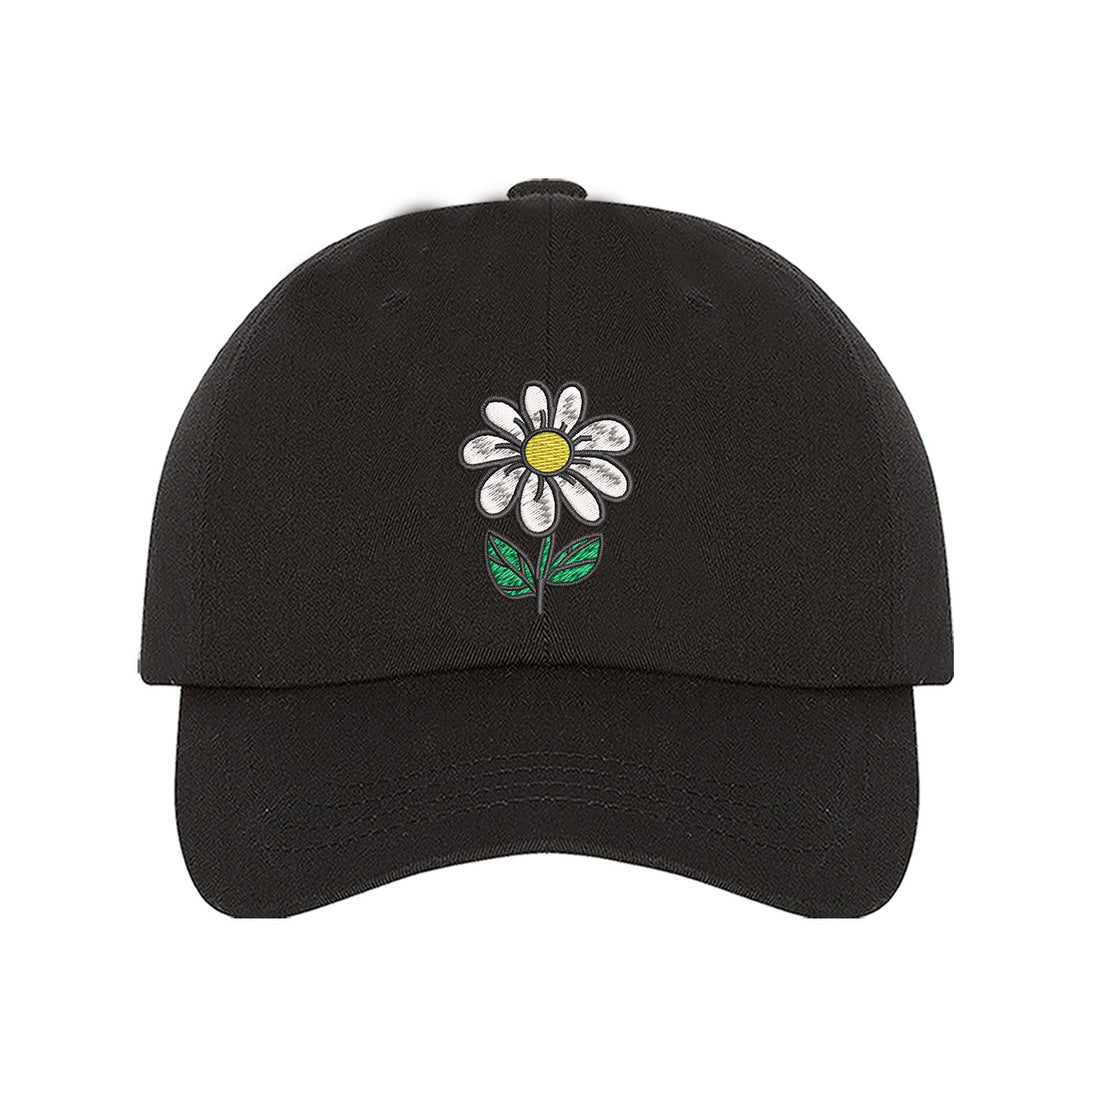 Black Baseball Cap embroidered with a daisy flower with stem - DSY Lifestyle